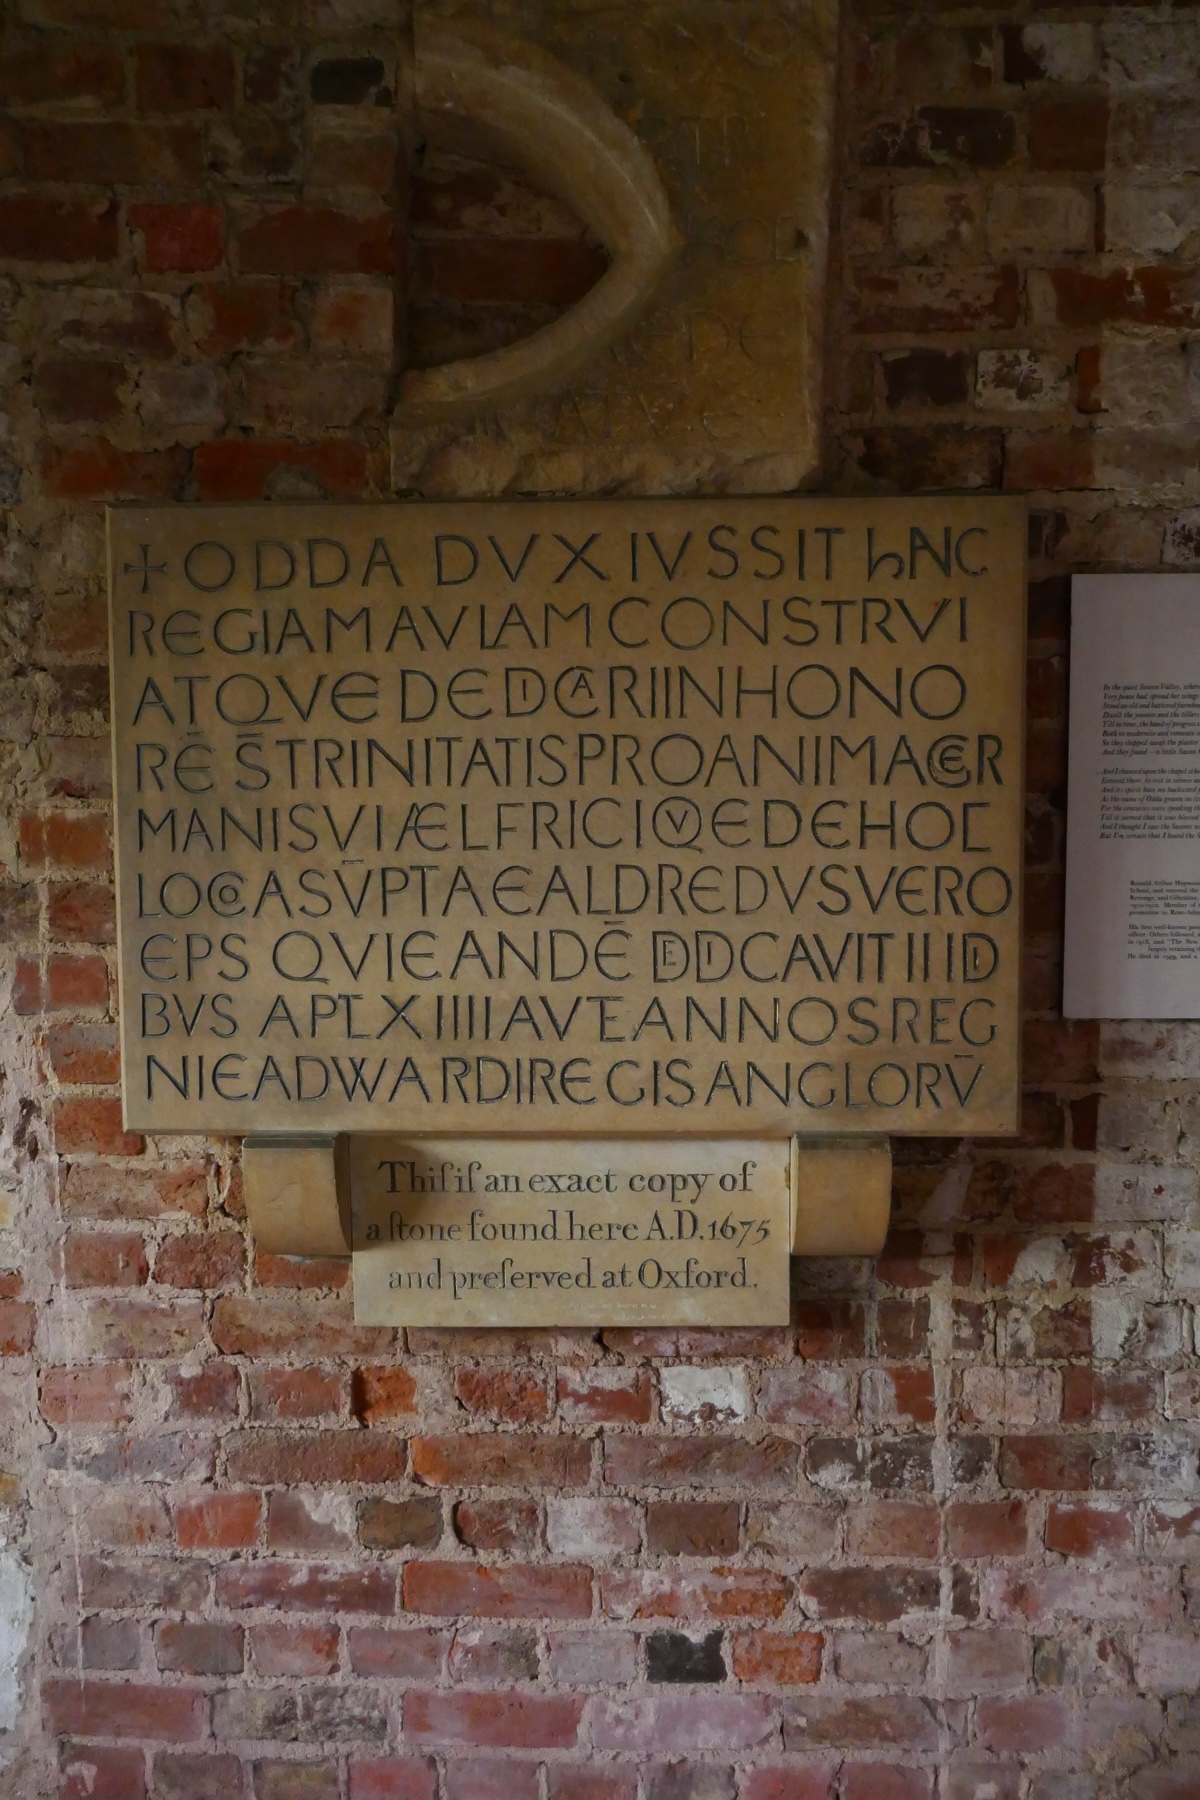 The dedication plaque records that the chapel was built in 1056